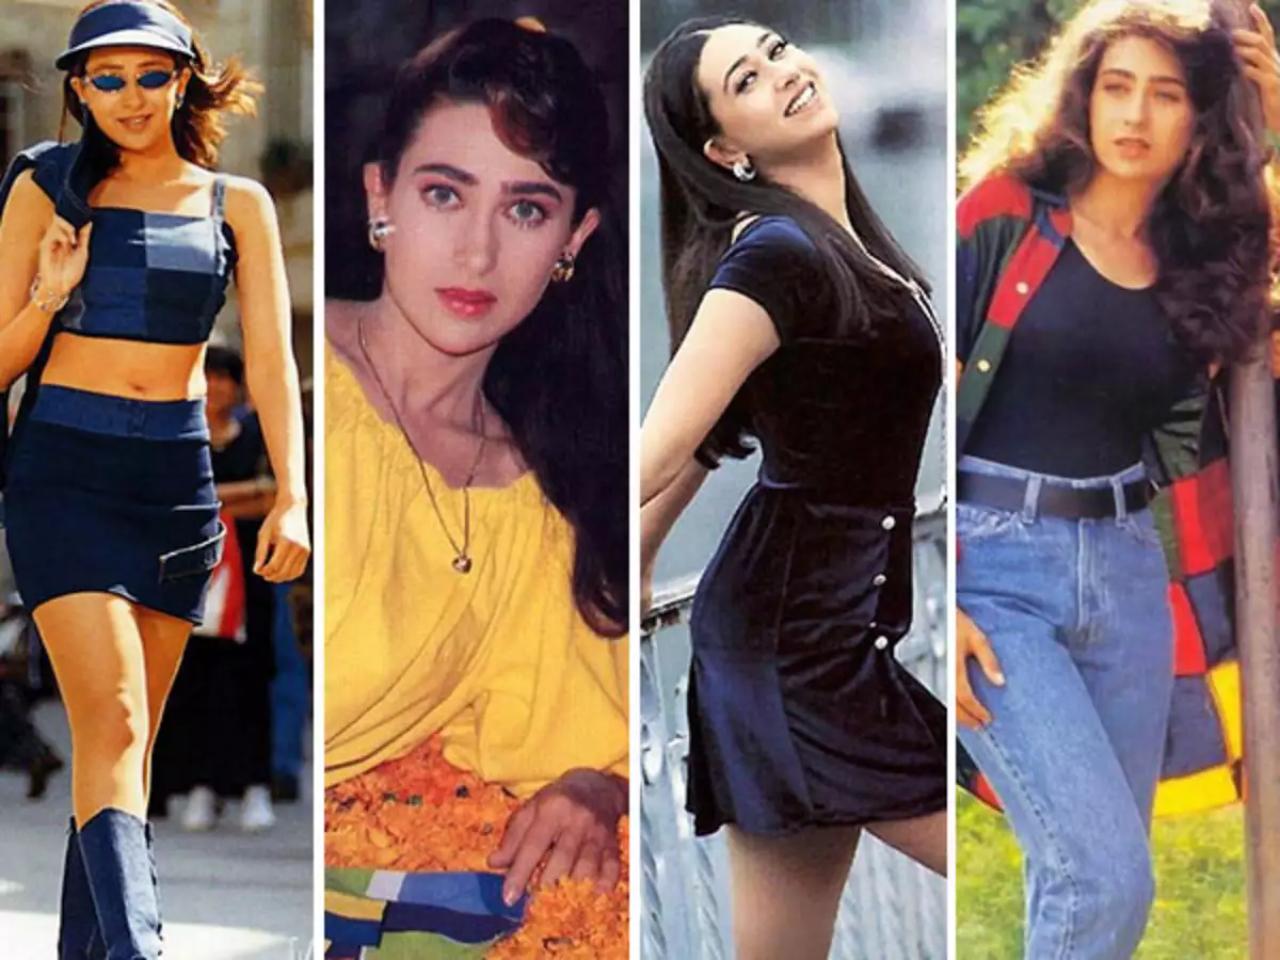 1990s Bollywood fashion
As India witnessed economic growth during this year, there was a fresh cinematic perspective. Movies transitioned towards romantic comedies like 'Kuch Kuch Hota Hai' and 'Dil To Pagal Hai', while still retaining a touch of familial sentiment in films like 'Hum Saath Saath Hain' and 'Hum Aapke Hain Koun'. This period artfully combined romance and humor with the traditional essence of family dramas.